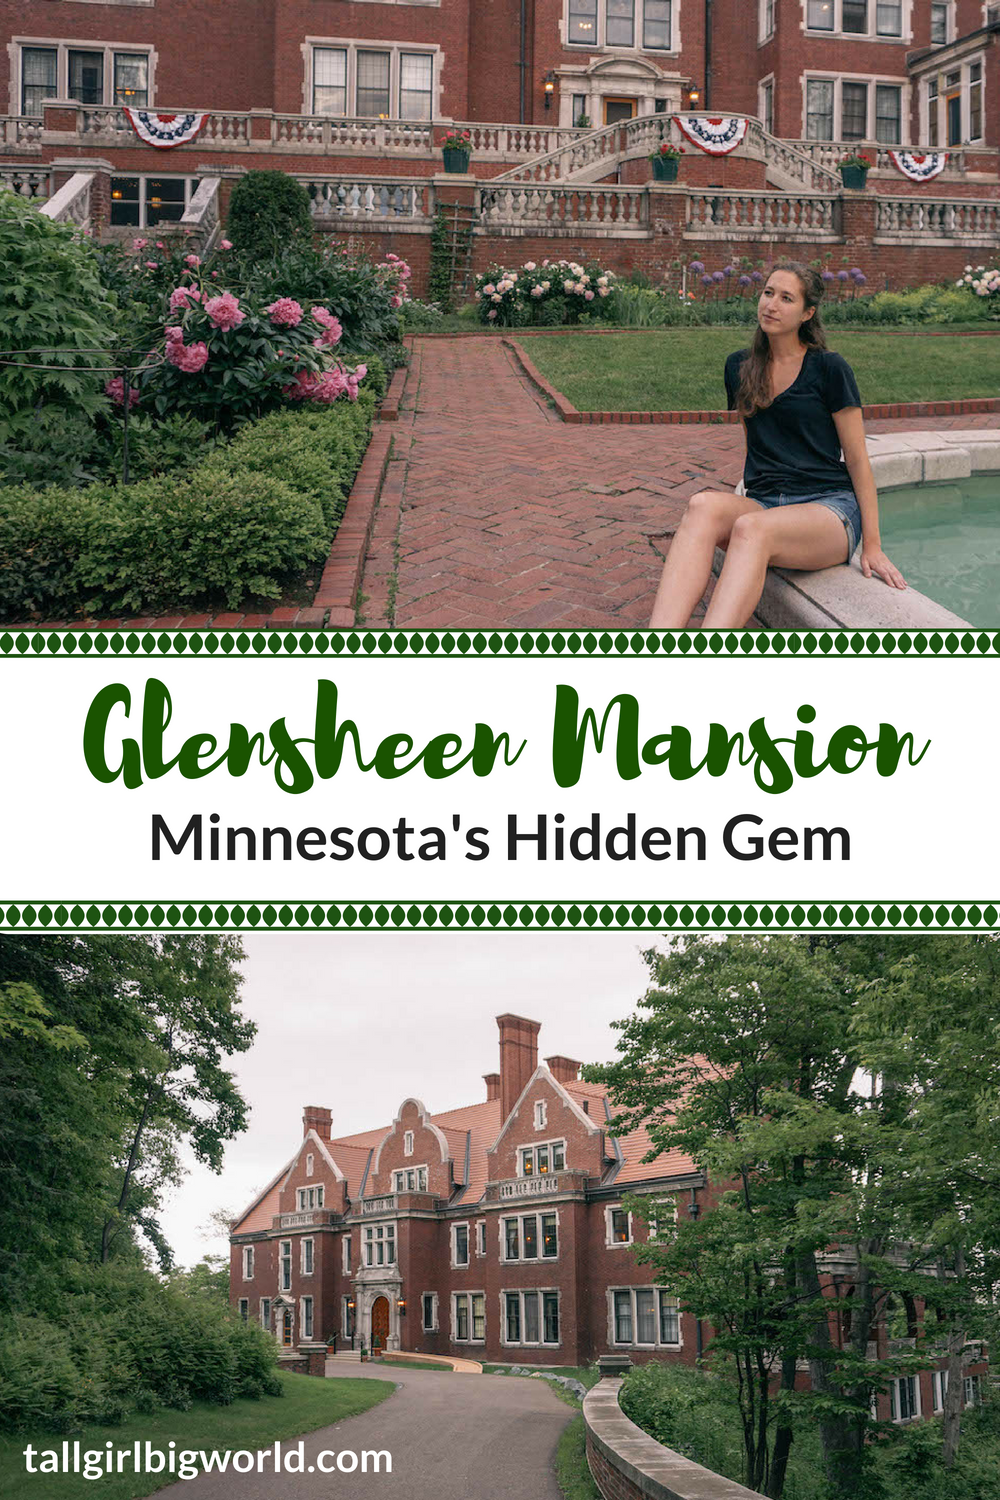 Glensheen Mansion in Duluth, MN is one of the hidden gems of the Midwest! Here's everything to know about visiting the mansion & its history.